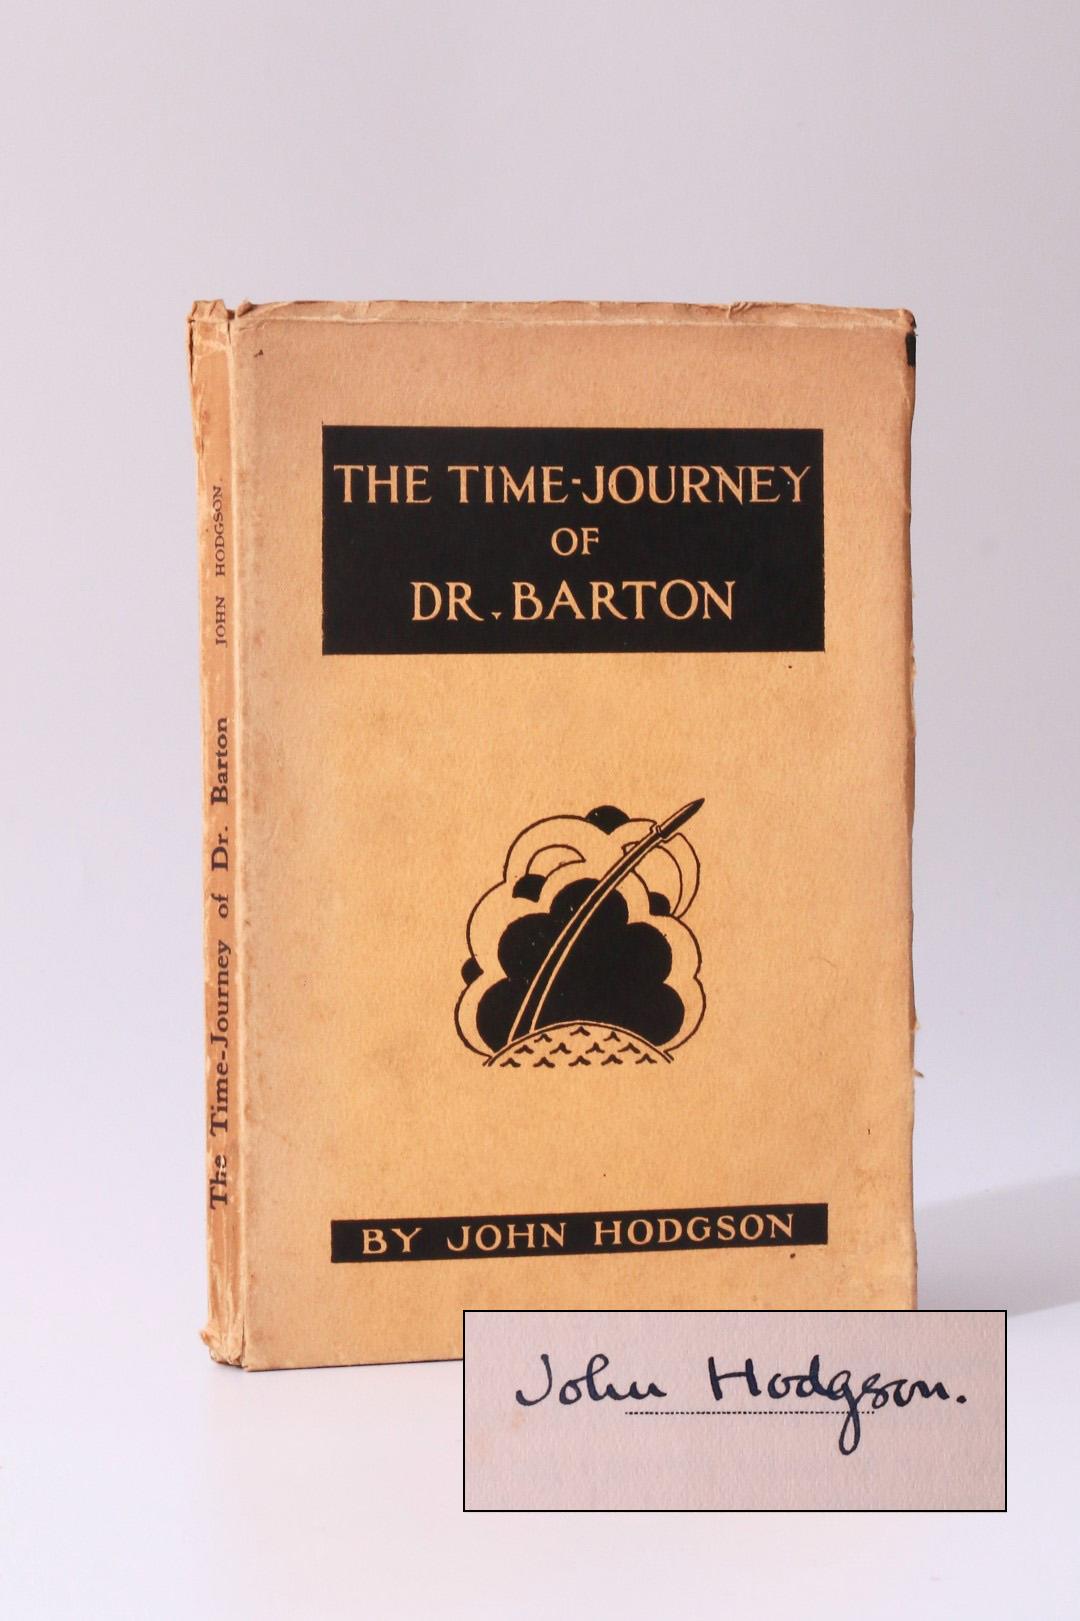 John Hodgson - The Time-Journey of Dr. Barton: An Engineering and Sociological Forecast based on Present Possibilities - John Hodgson, 1929, Signed Limited Edition.